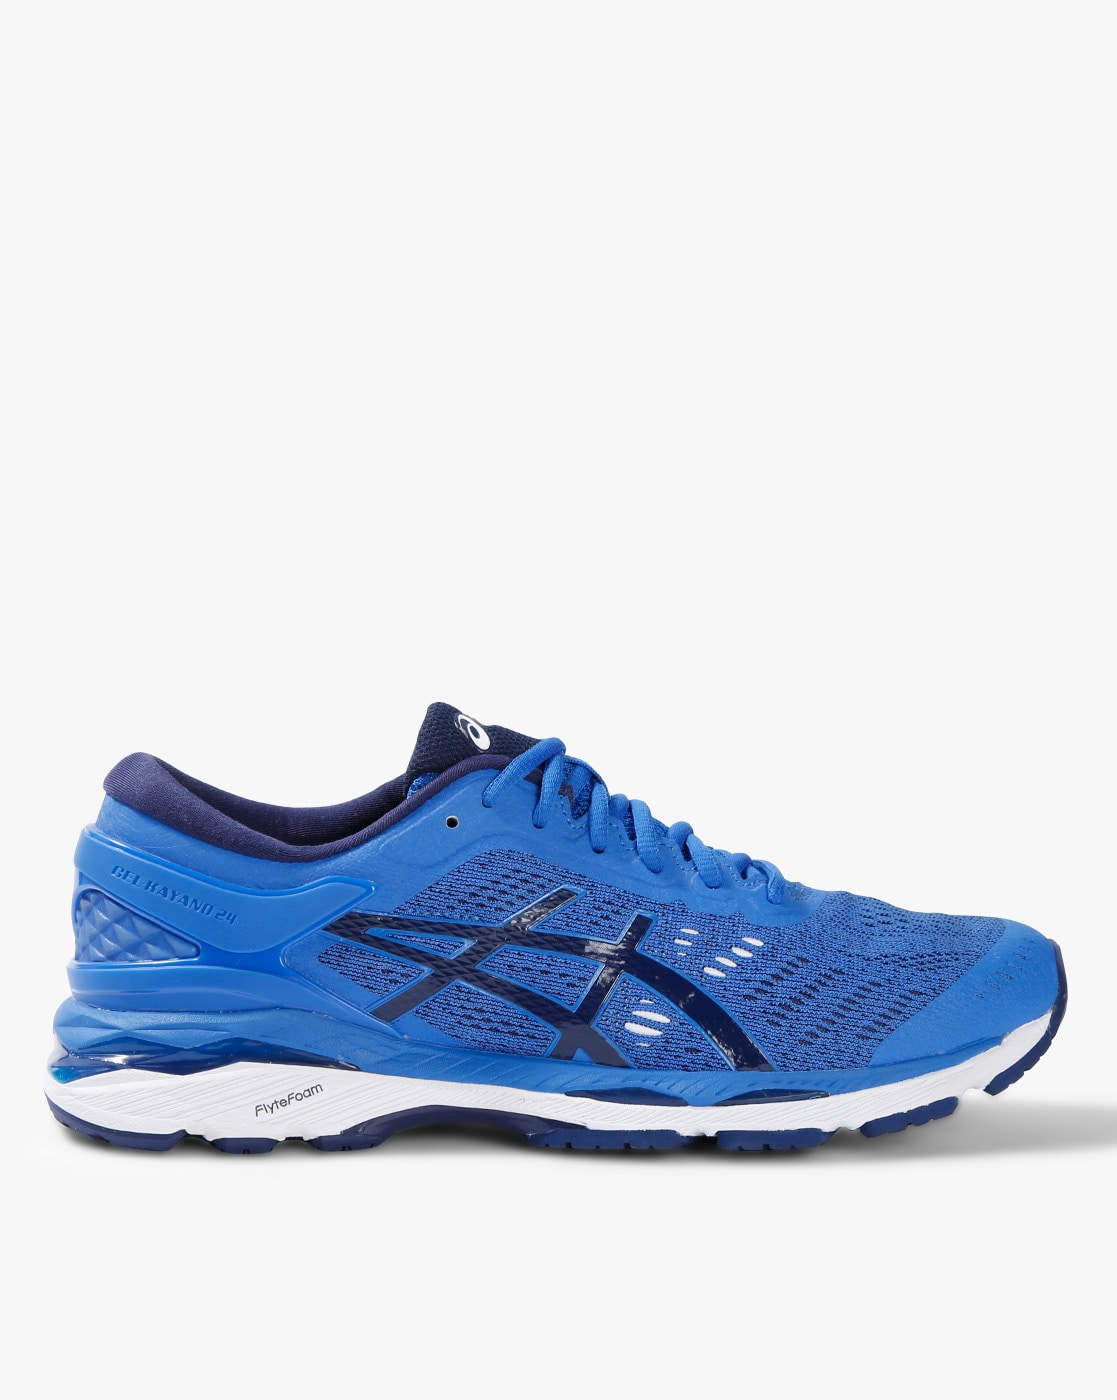 asics mens shoes online india